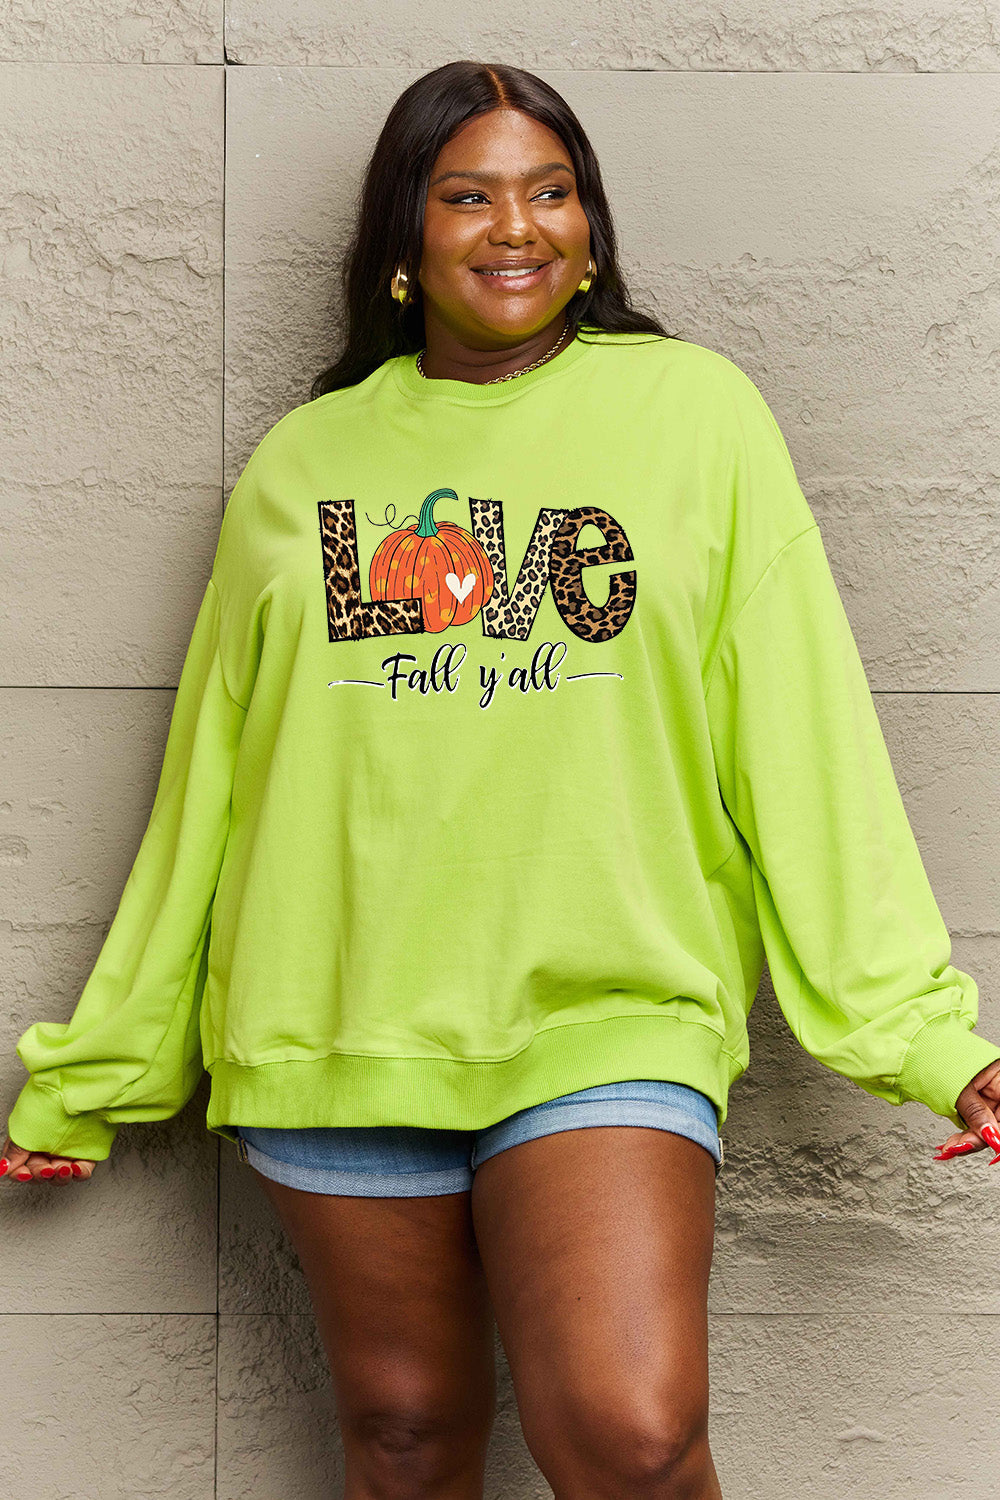 Simply Love Full Size LOVE FALL Y'ALL Graphic Sweatshirt BLUE ZONE PLANET